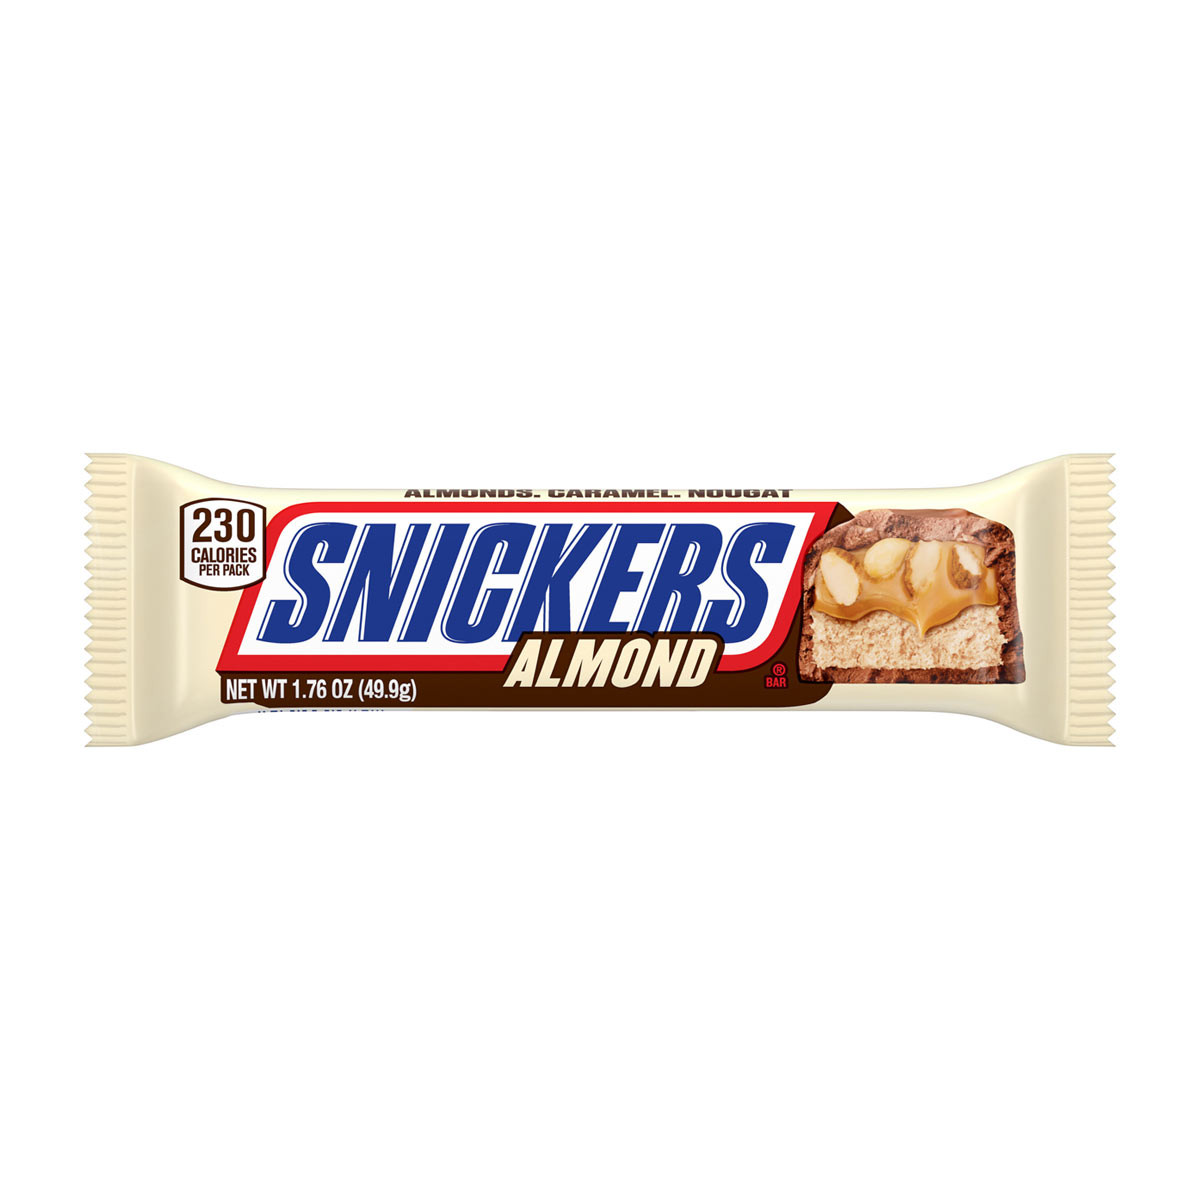 Snickers Almond Single Size Chocolate Candy Bar, 1.76 oz